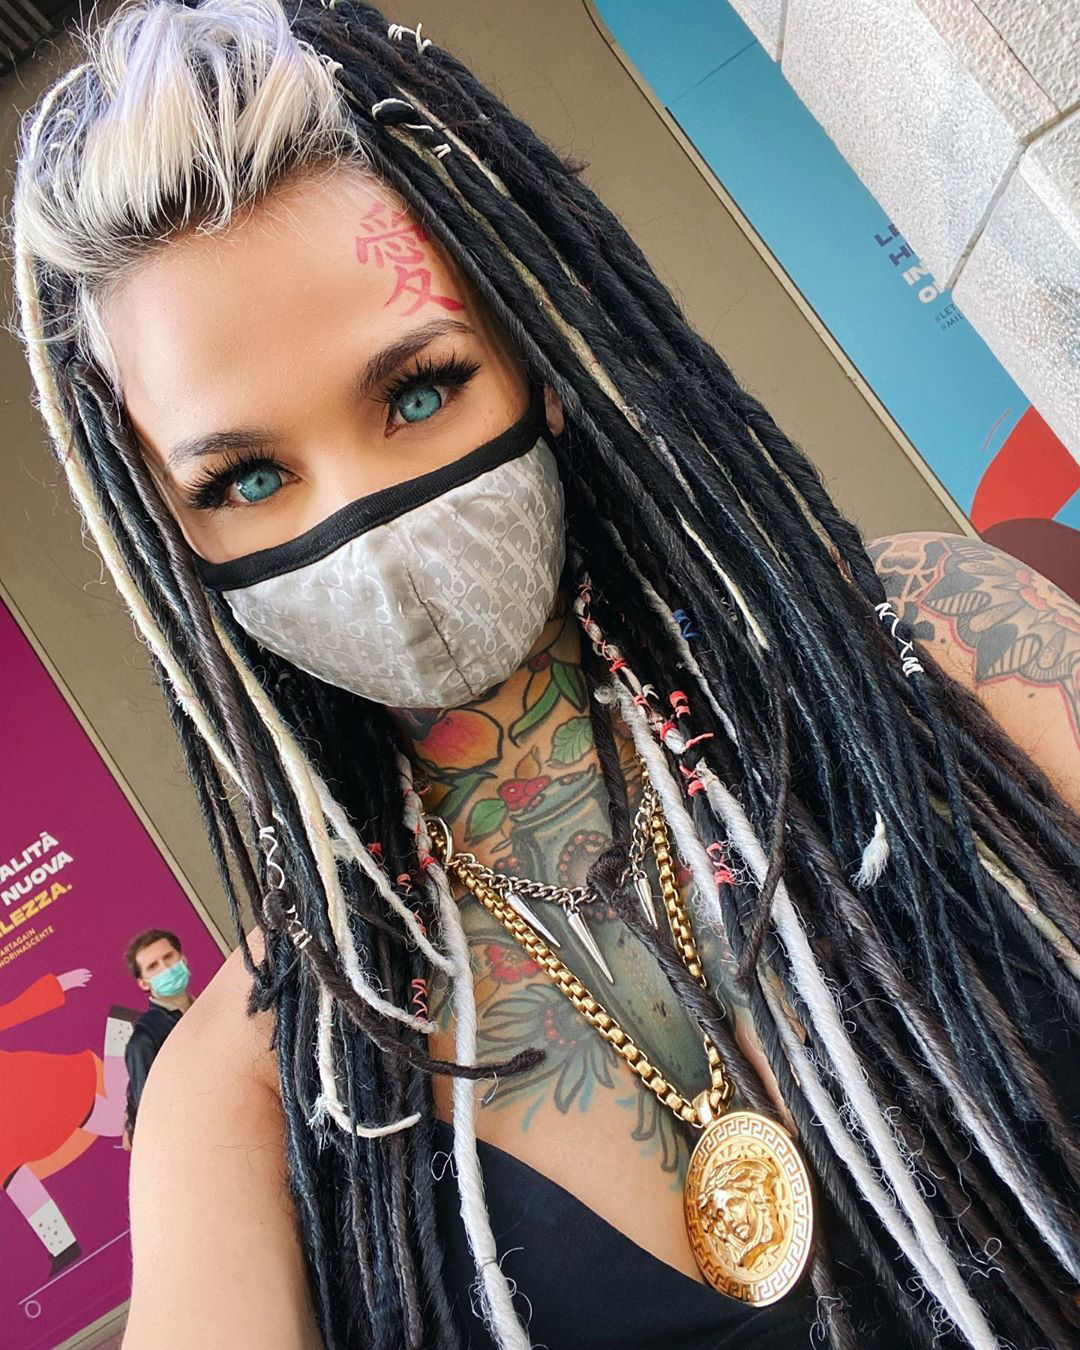 Watch the Photo by Devynsdogg with the username @Devynsdogg, posted on May 18, 2020. The post is about the topic Girls You Dream Of. and the text says 'The eyes are the windows of the soul in this new reality! #fetish #sexyfemales #blondesarebeautiful #tattoo #babes #braids #altmodels
https://www.instagram.com/p/CAVnAGJBADz/?utm_source=ig_web_copy_link'